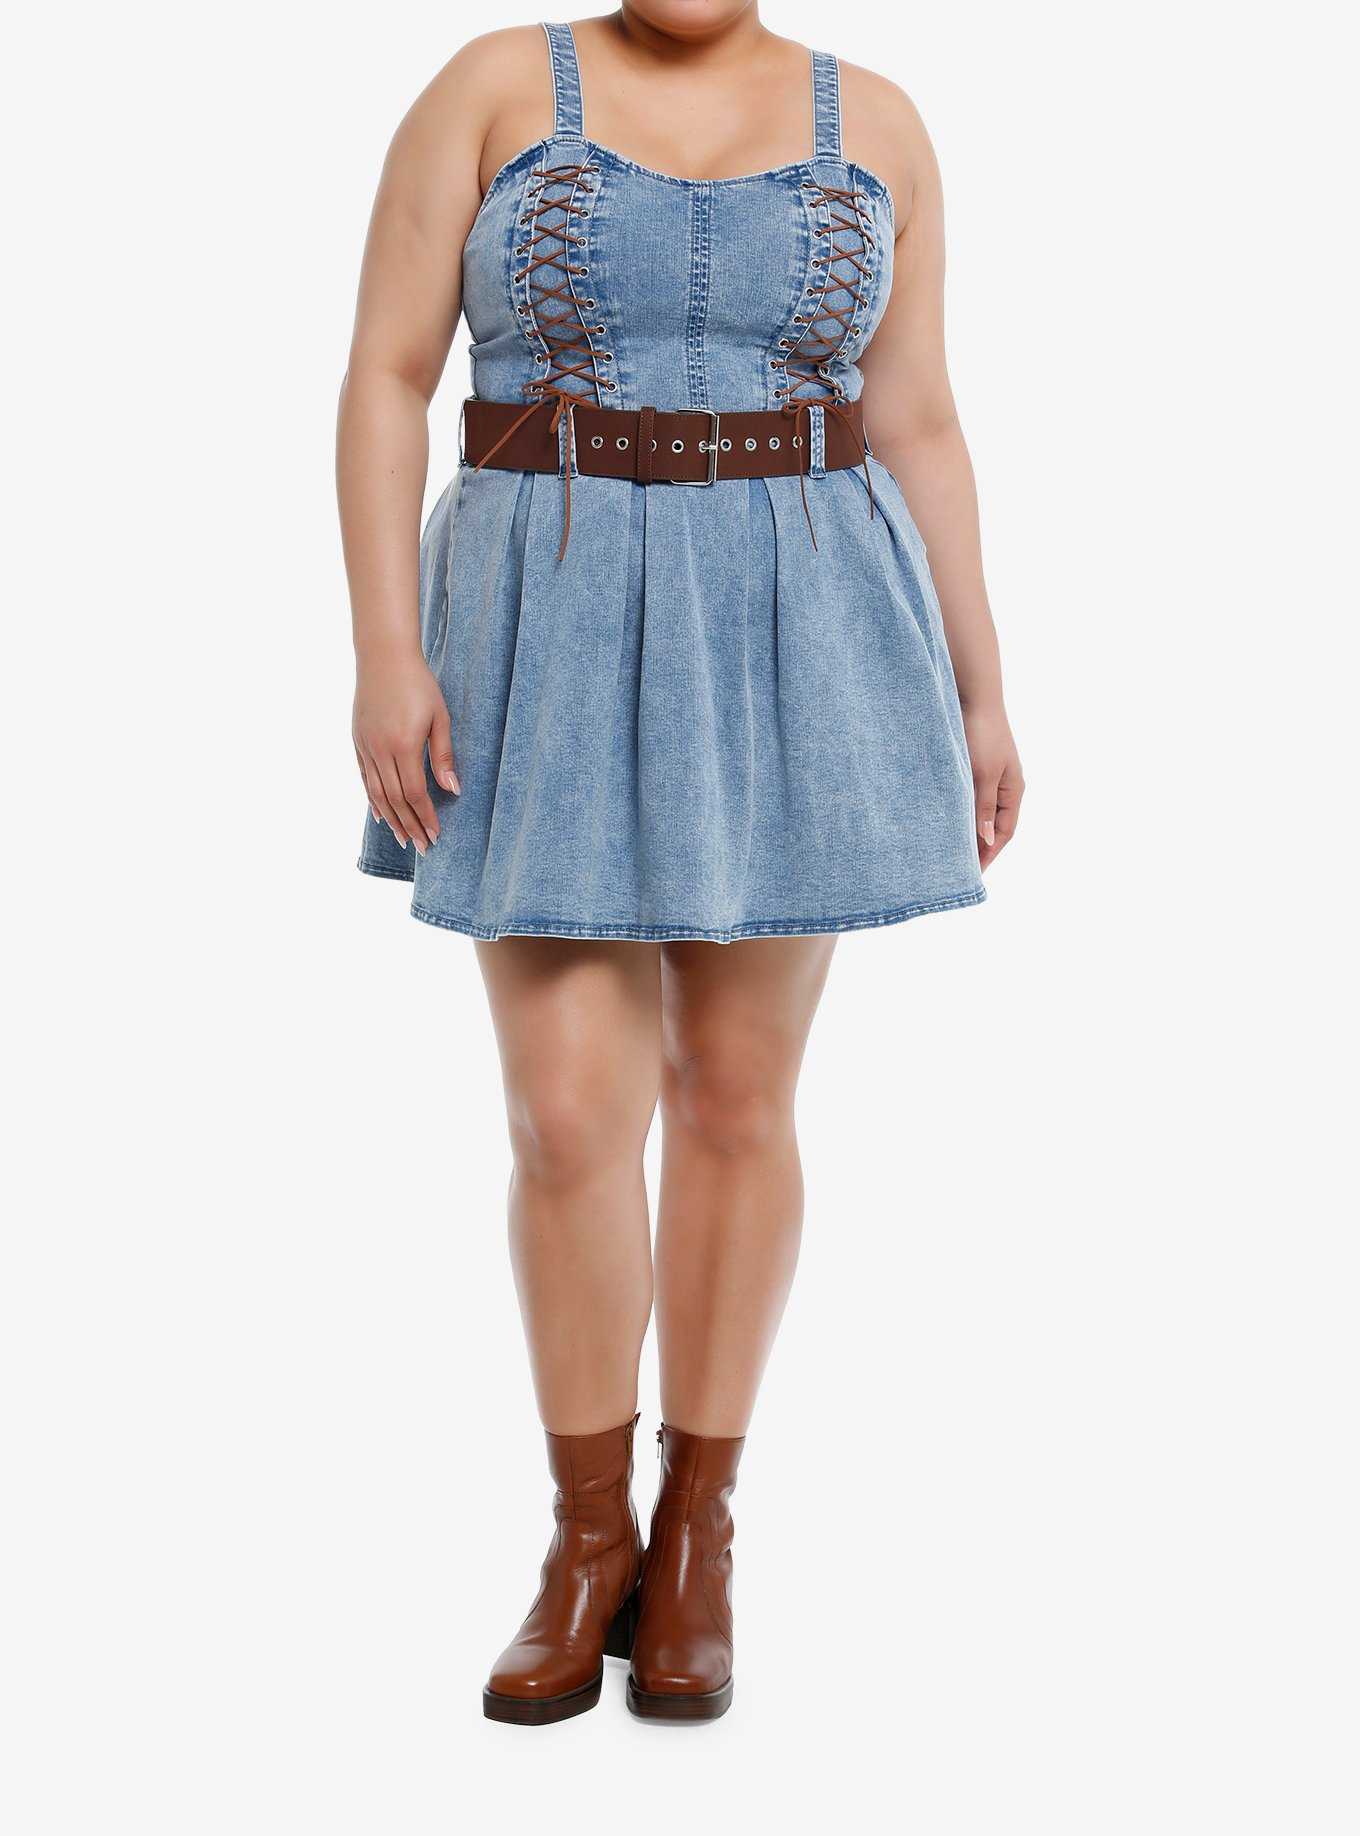 Sweet Society® Brown Lace-Up Belted Denim Dress Plus Size, , hi-res